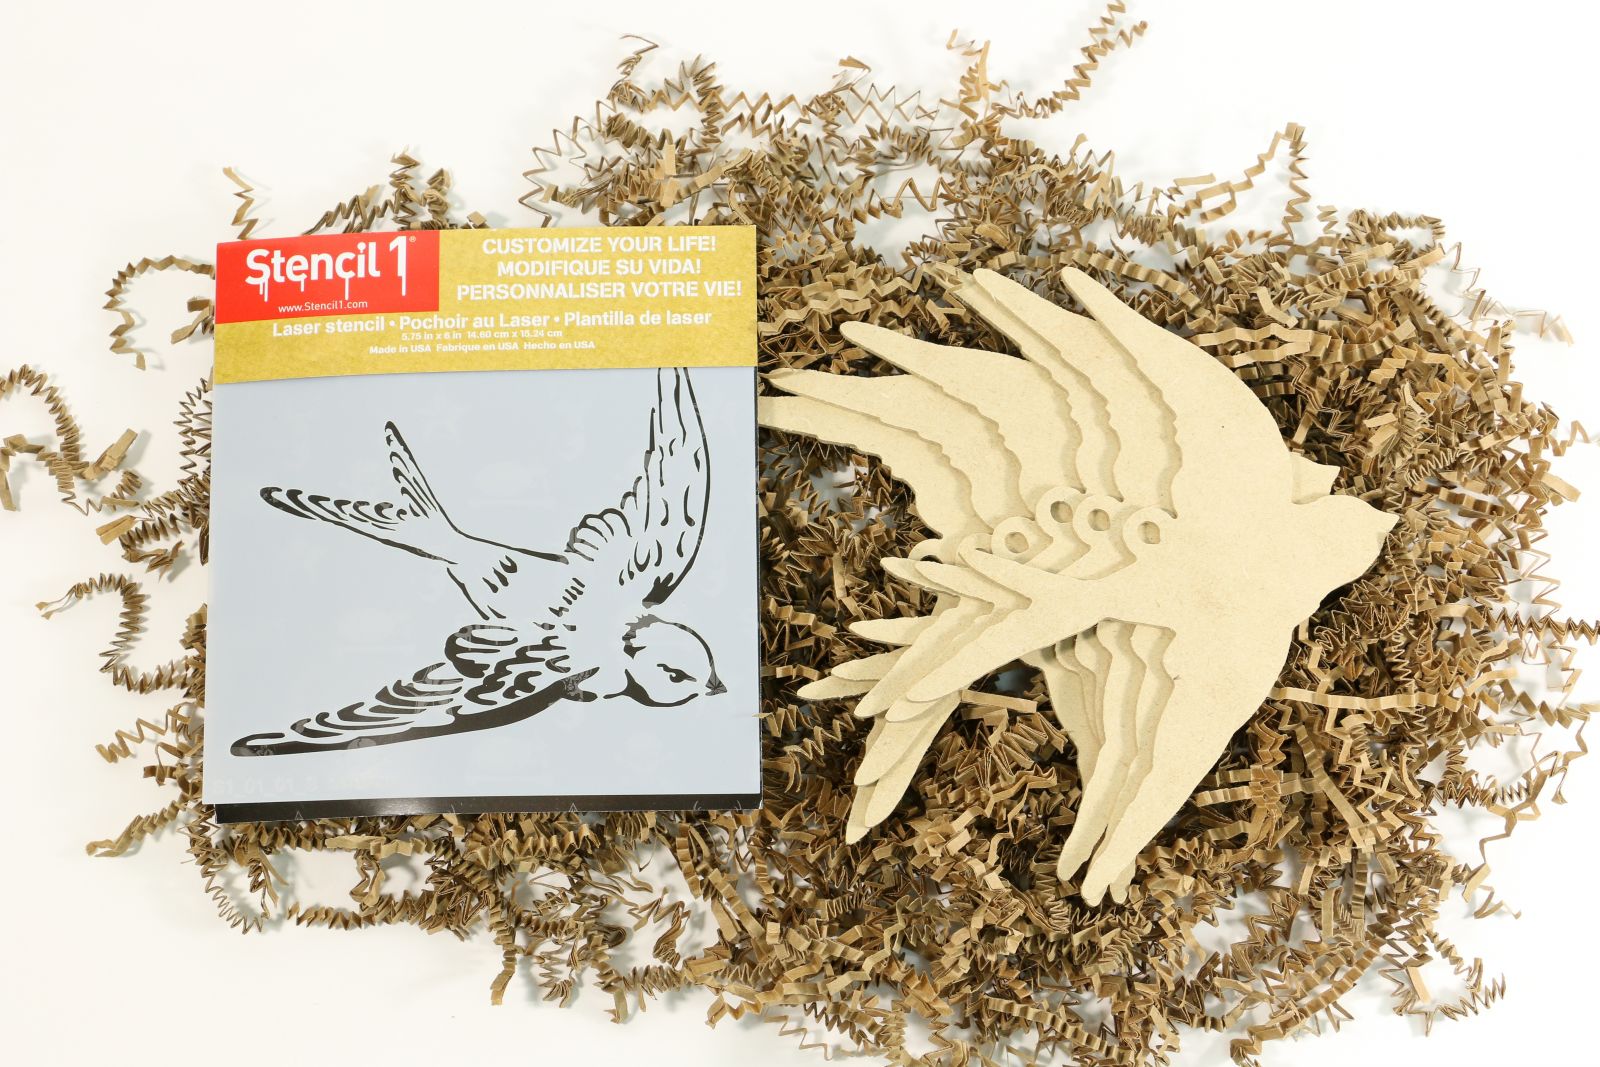 Stenciled Ornament Kit from Stencil1